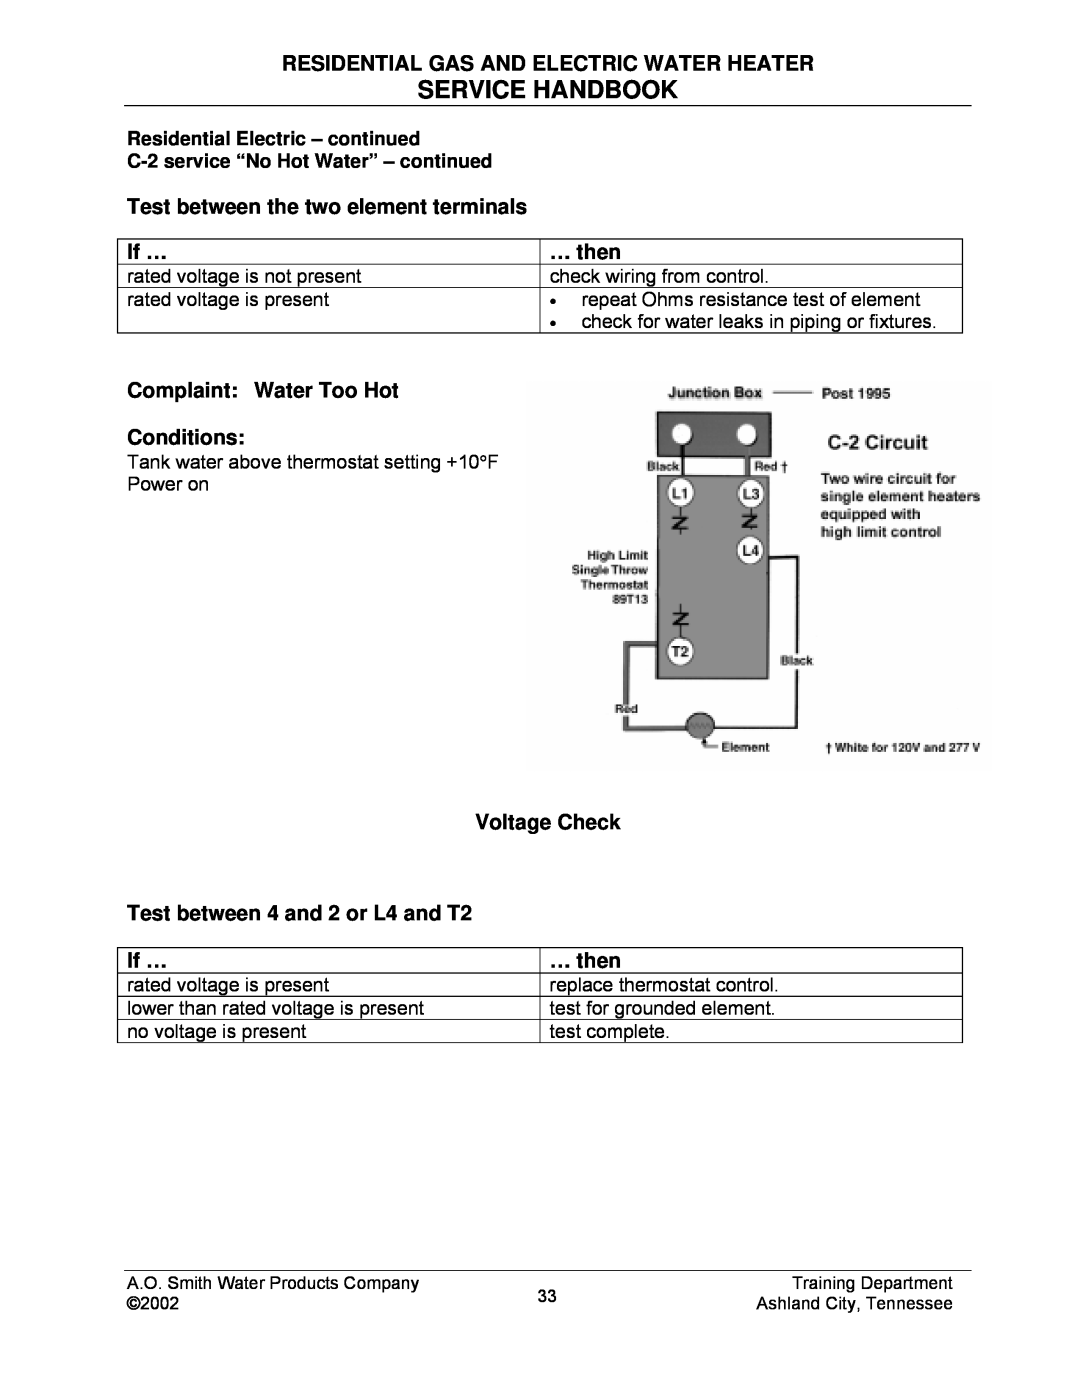 A.O. Smith TC-049-R2 Service Handbook, Residential Gas And Electric Water Heater, Test between the two element terminals 